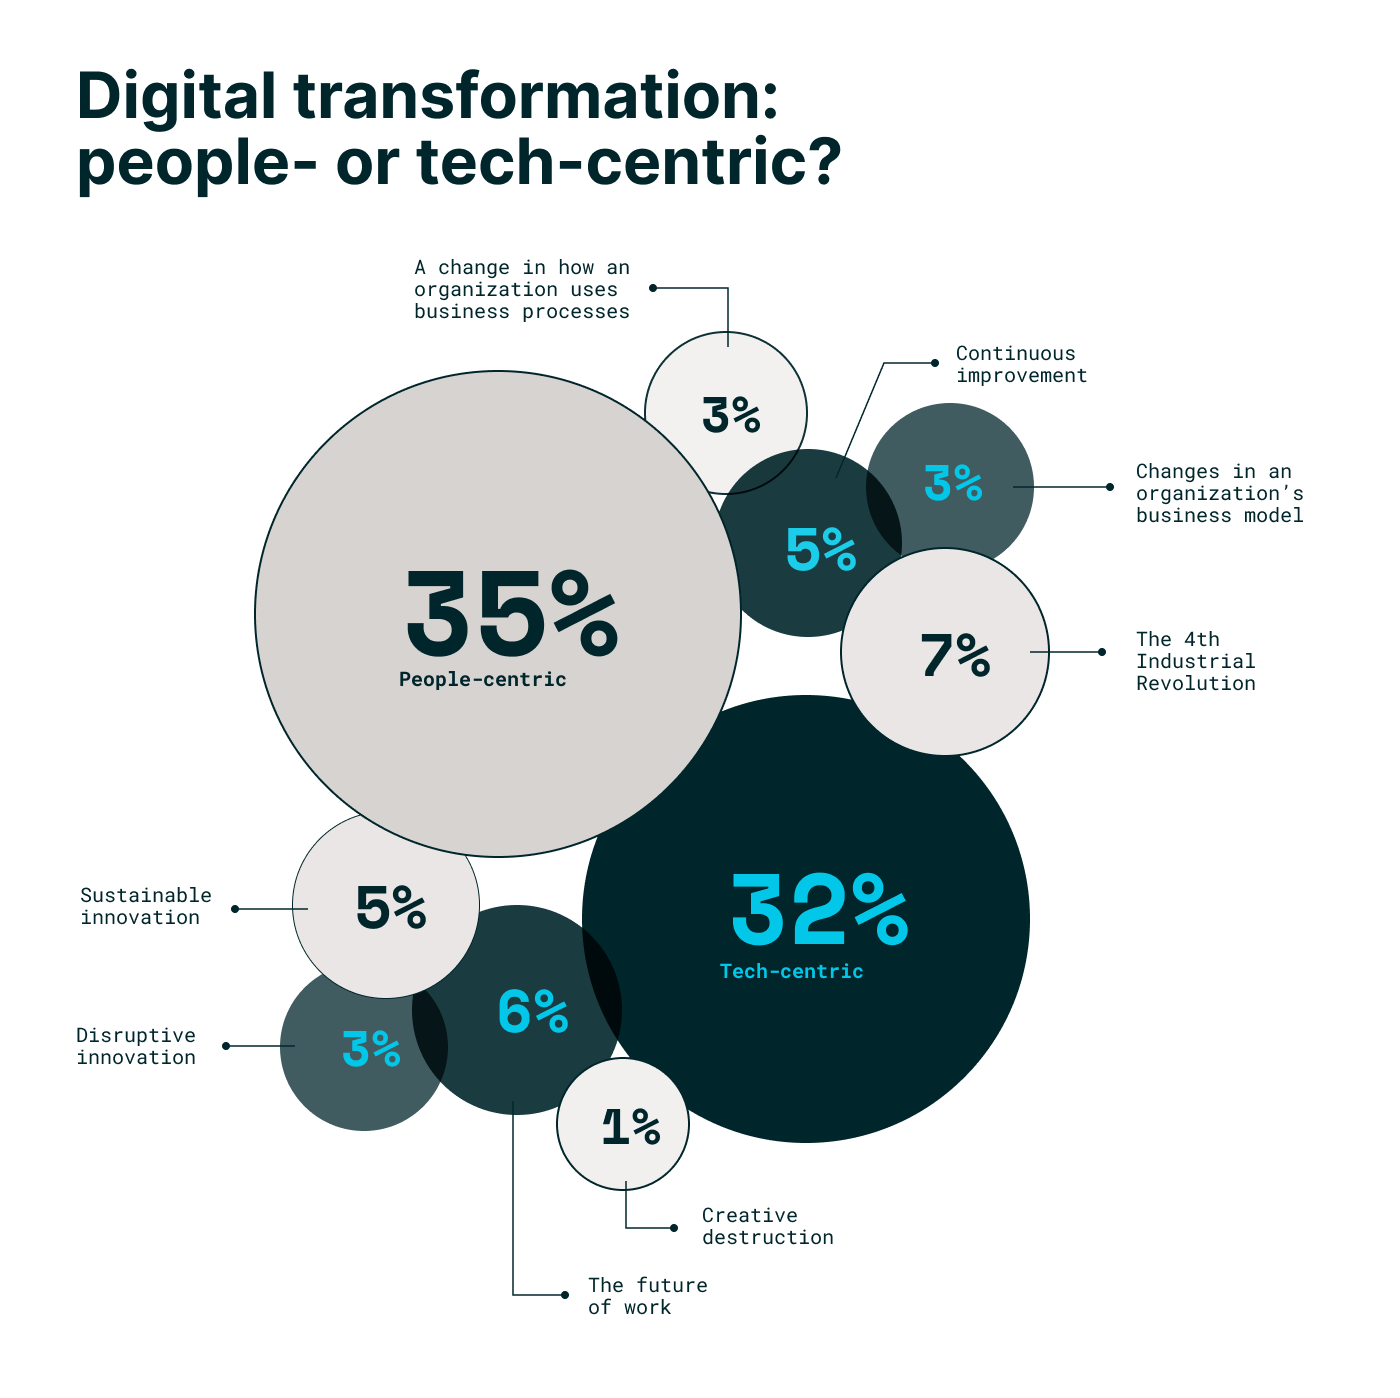 Digital transformation: People- or tech-centric?